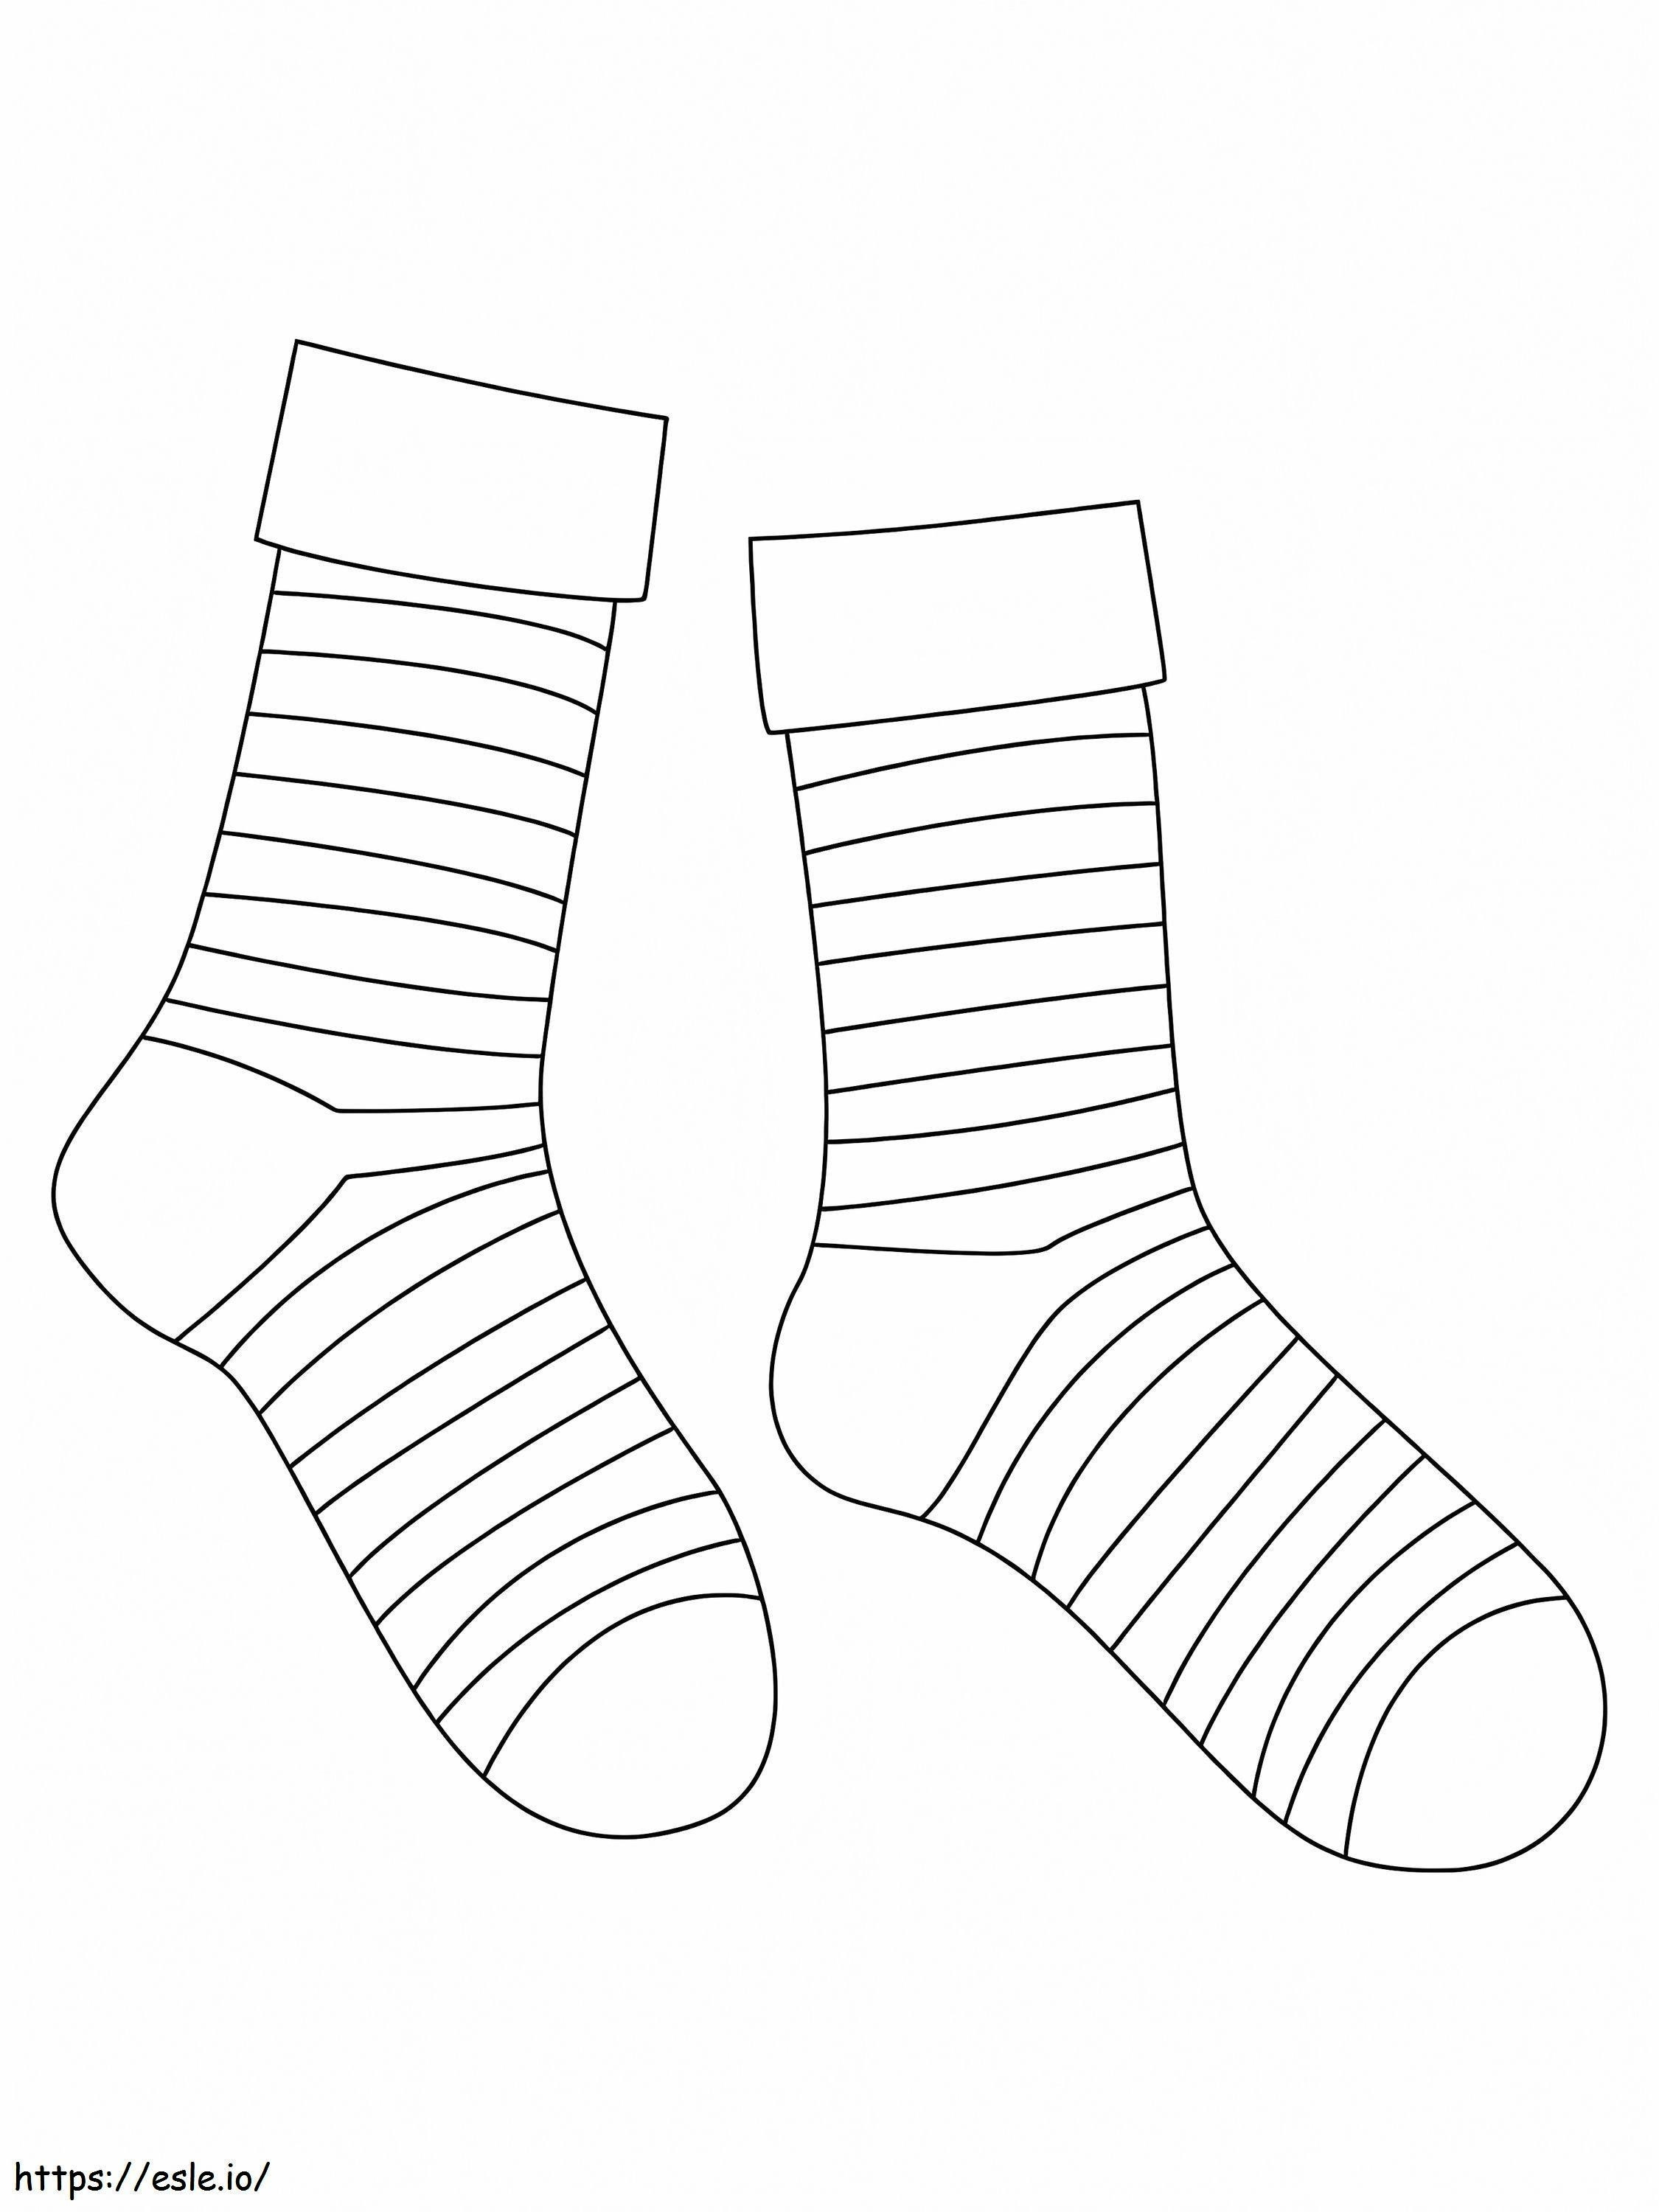 Perfect Socks coloring page